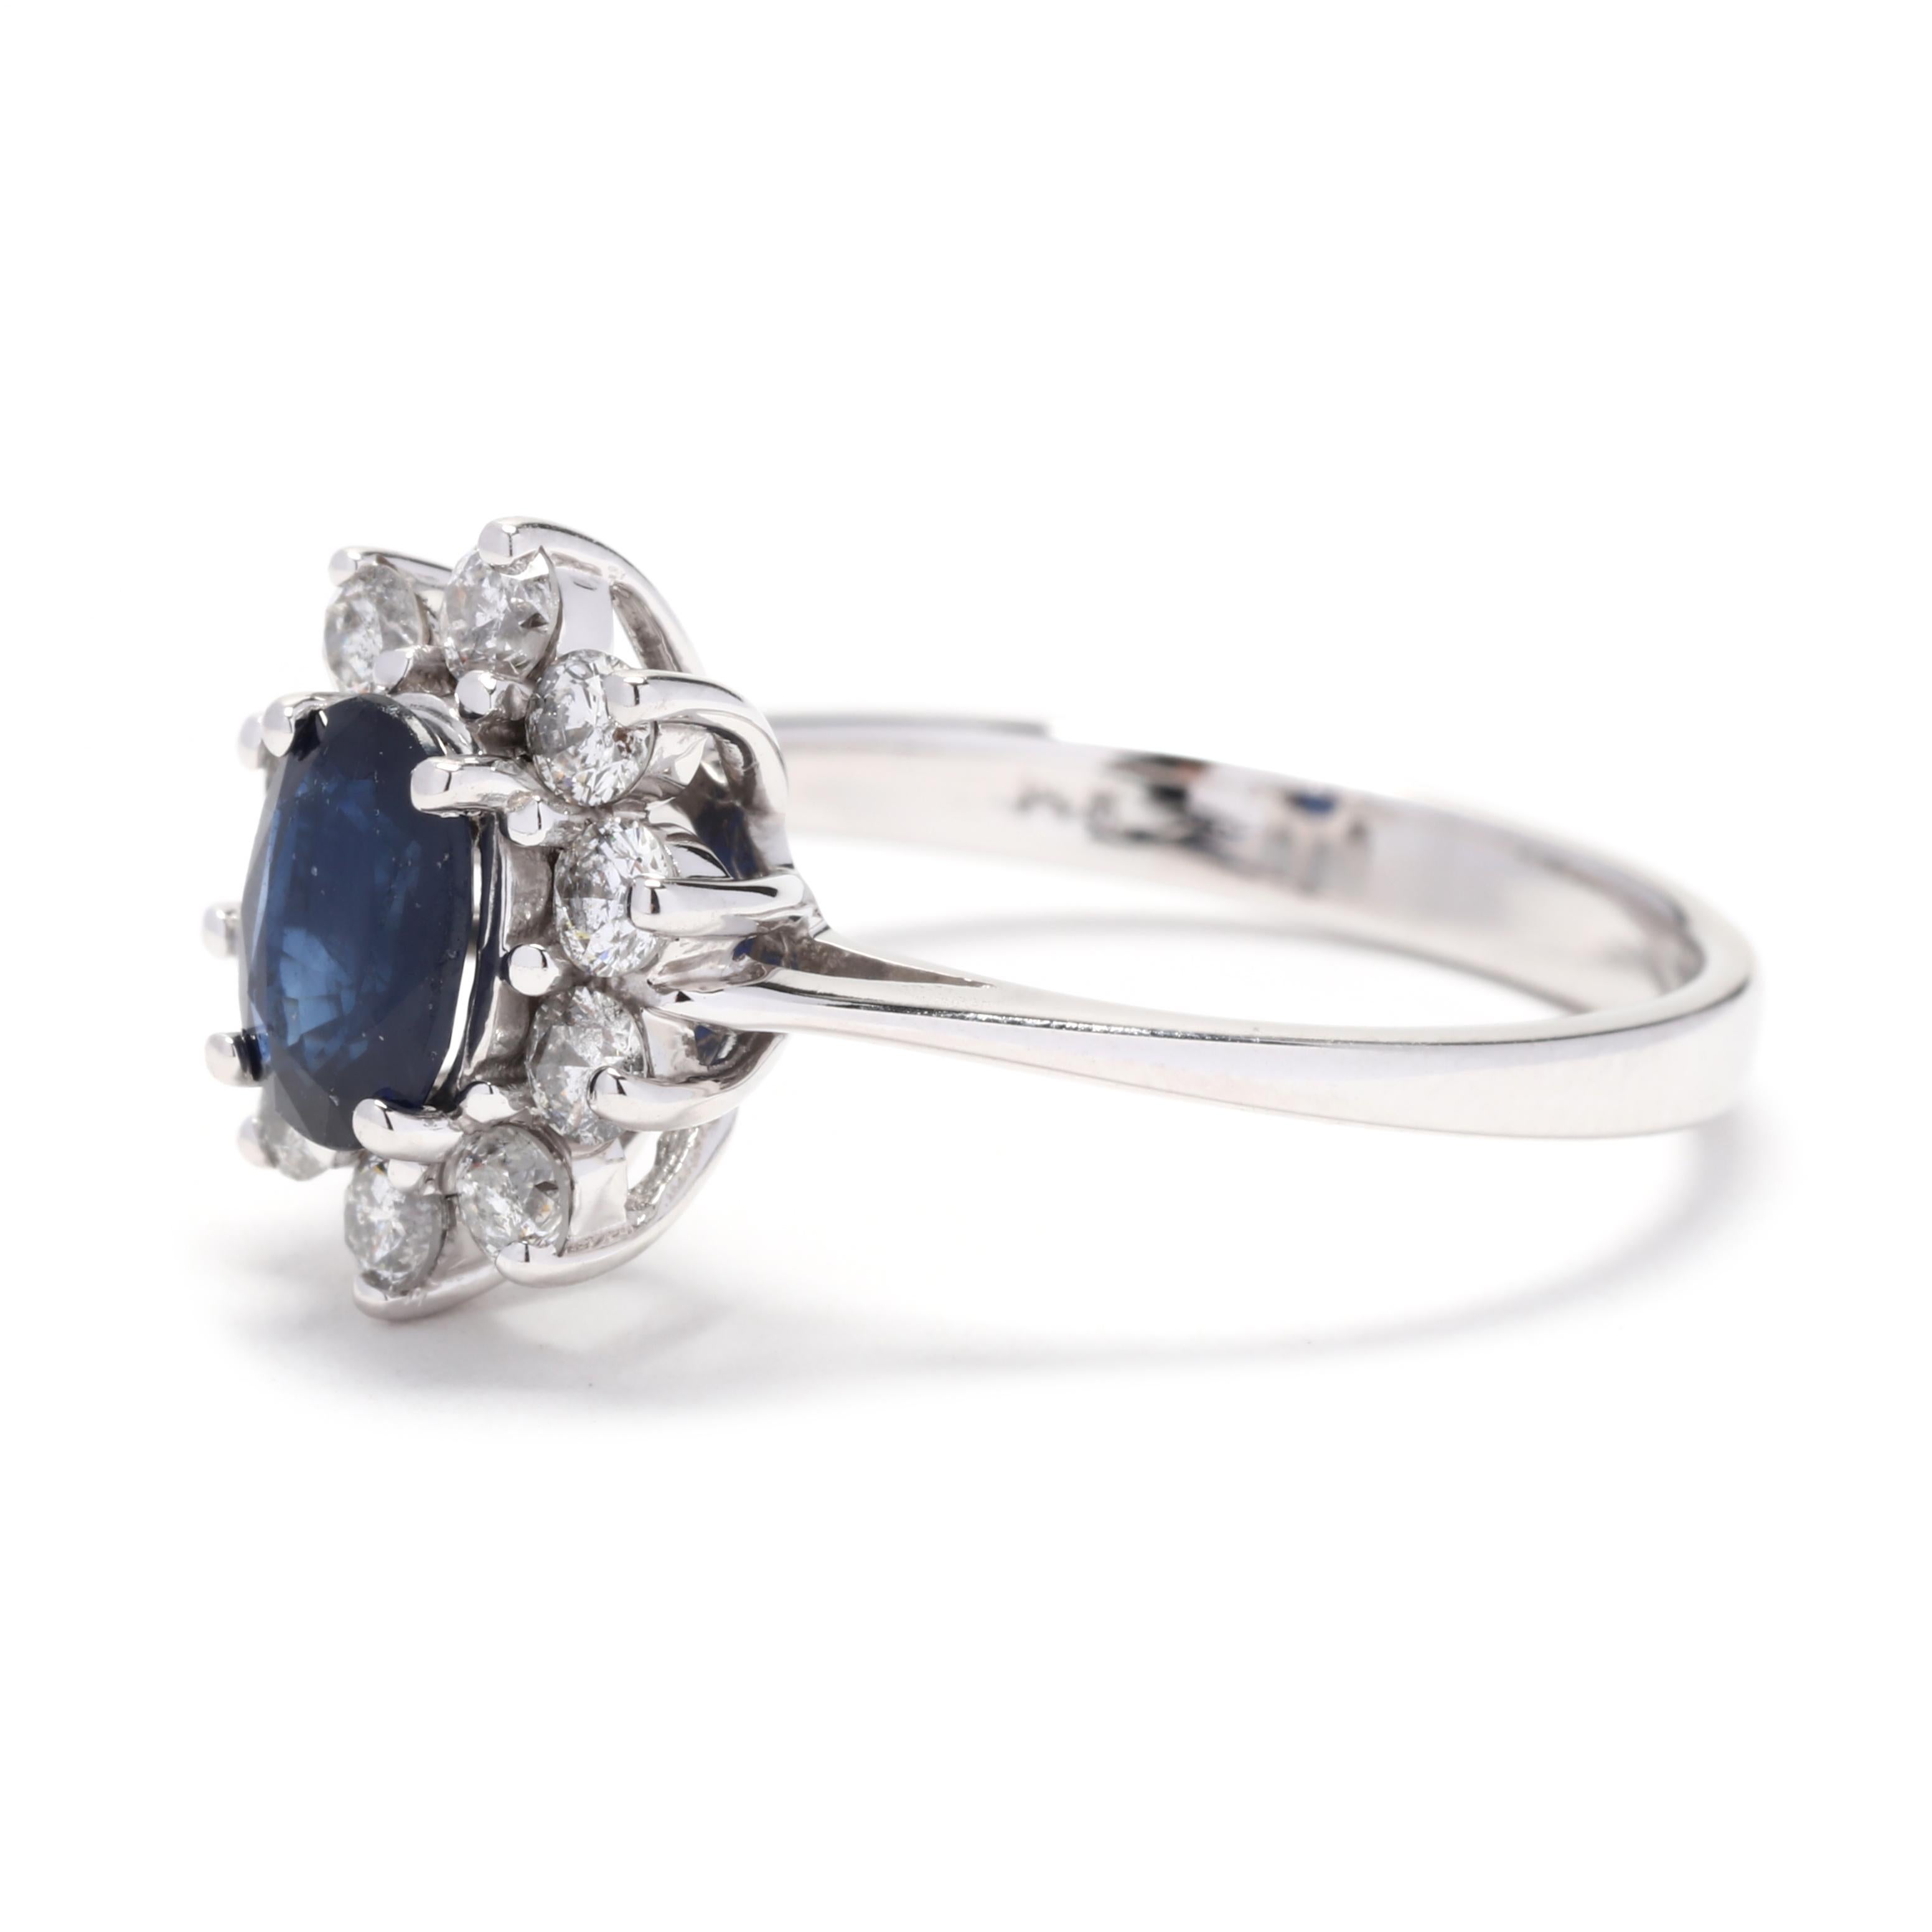 Sapphire Diamond Halo Engagement Ring, 14K White Gold, Ring Size 7.25 In Good Condition For Sale In McLeansville, NC